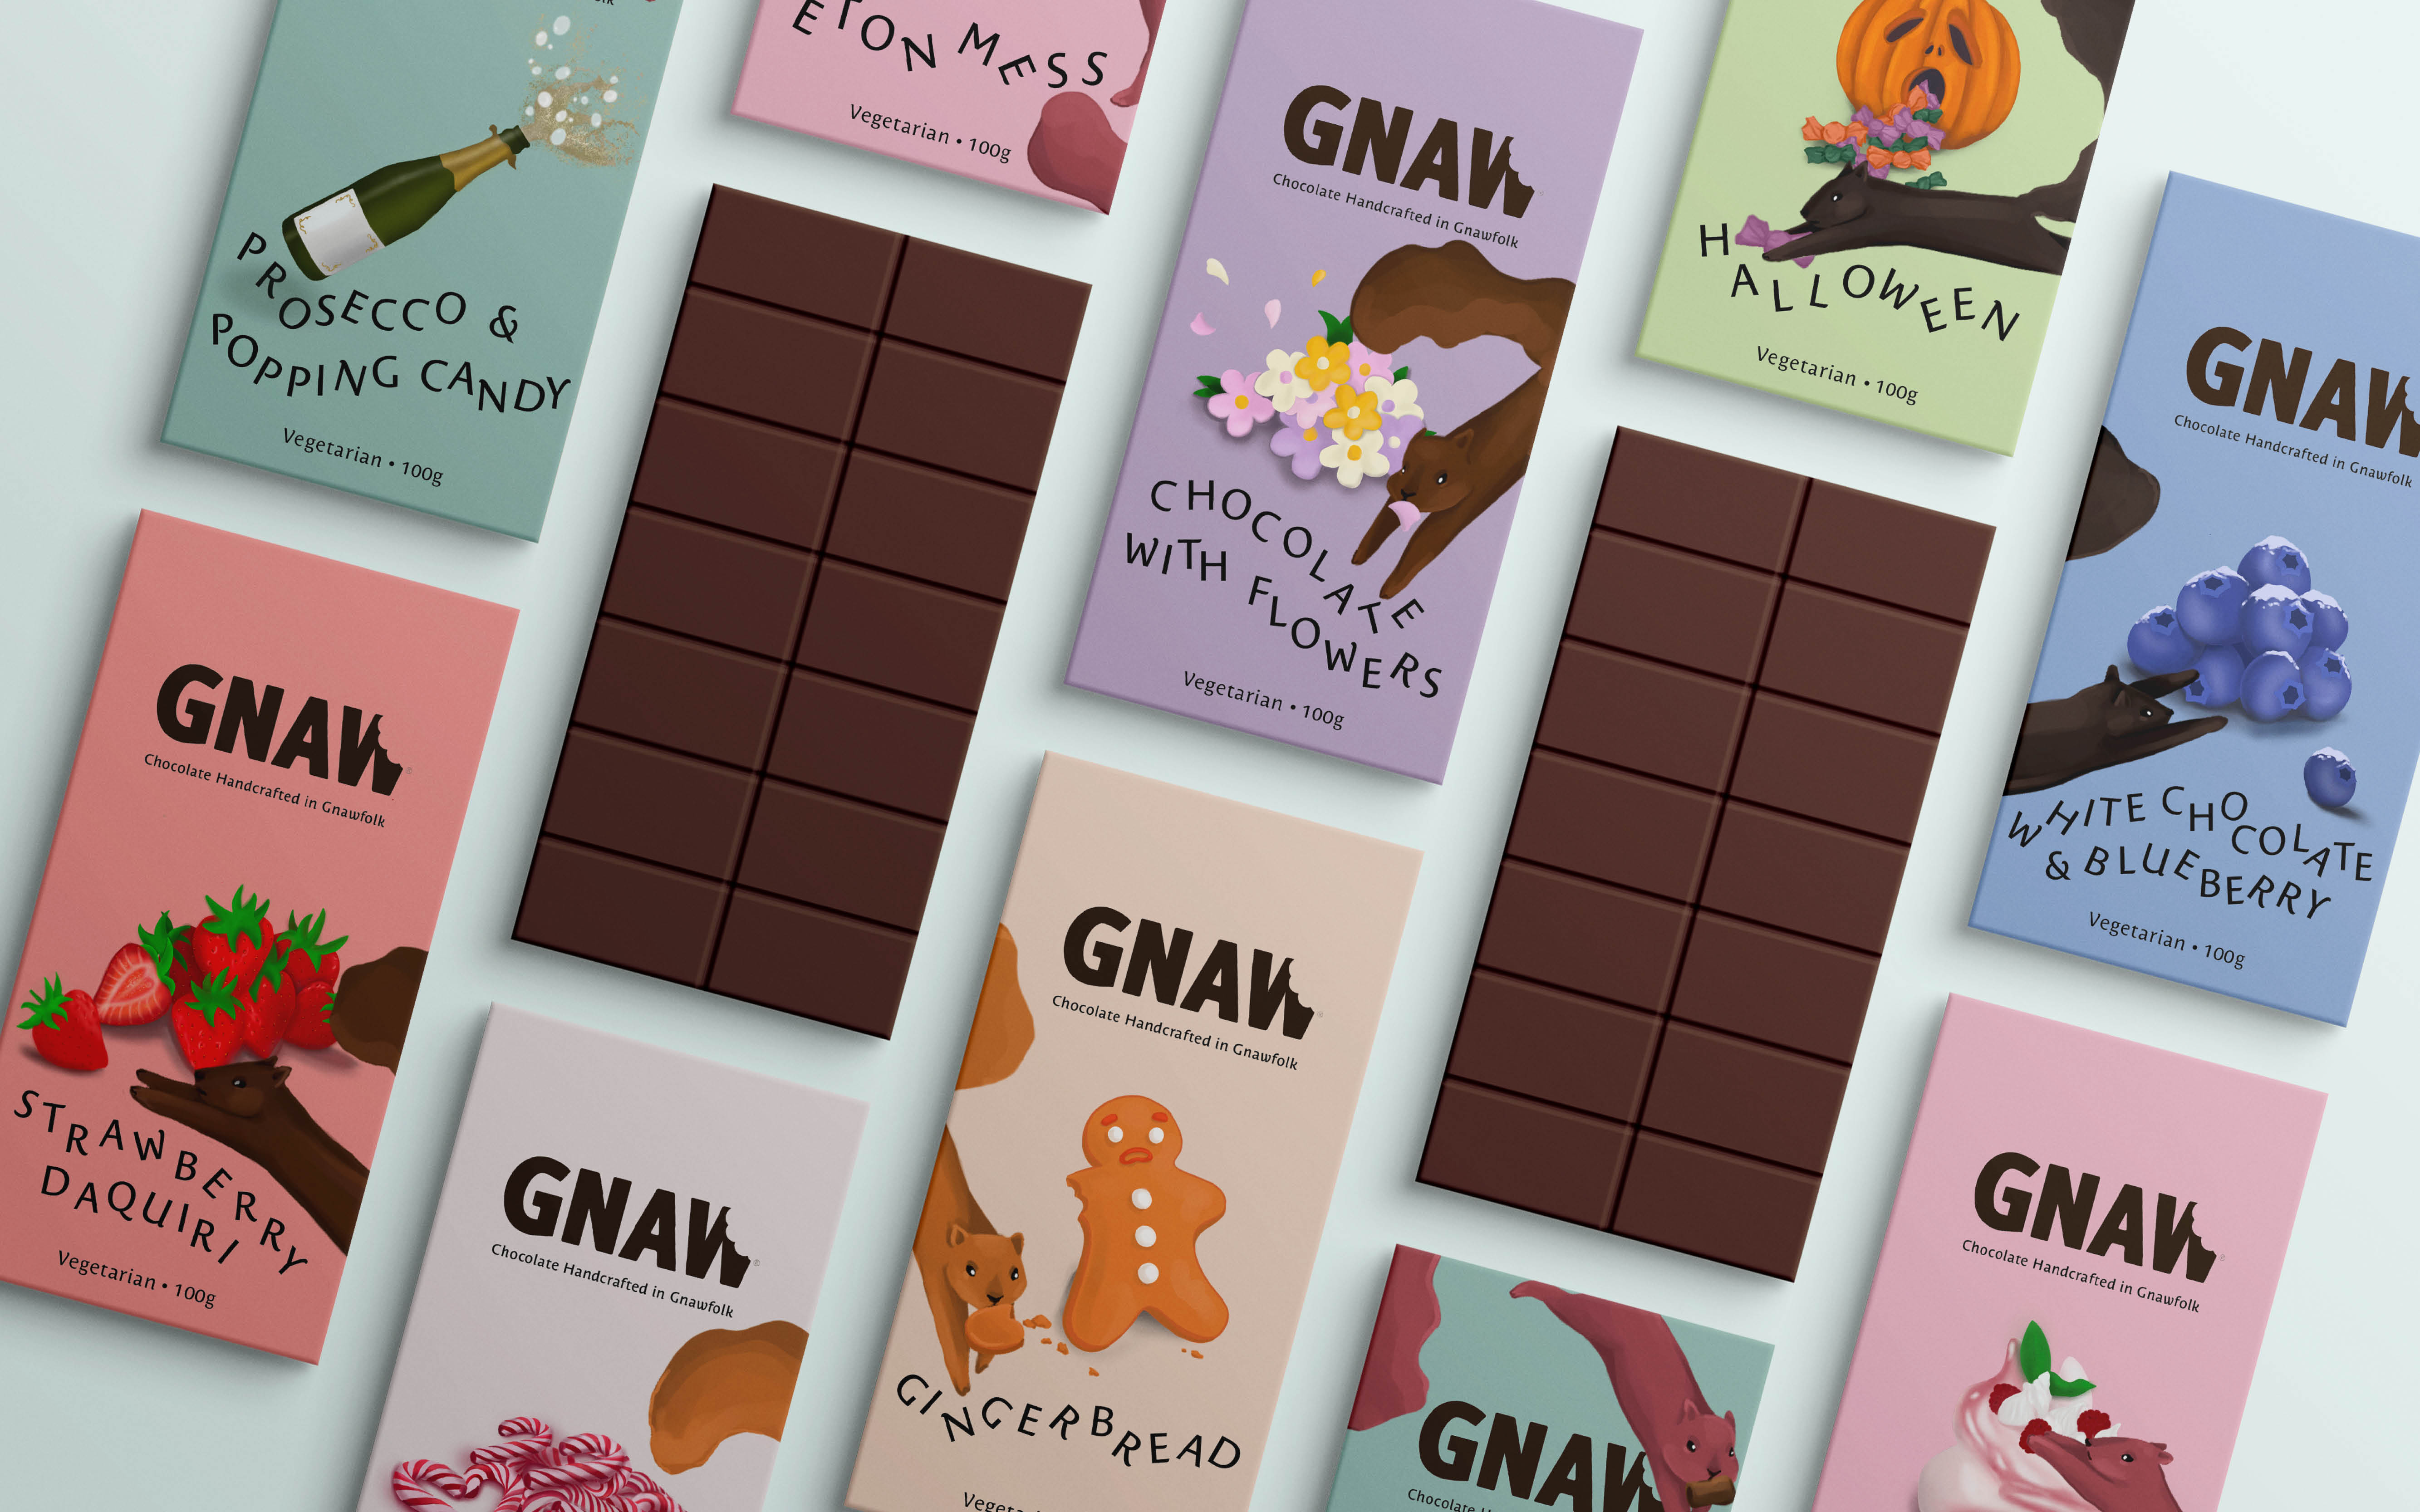 BA Graphic Design work by Lucy Howett. Gnaw is a collaborative project designing and illustrating 8 chocolate bar design outcomes for brand new flavours.